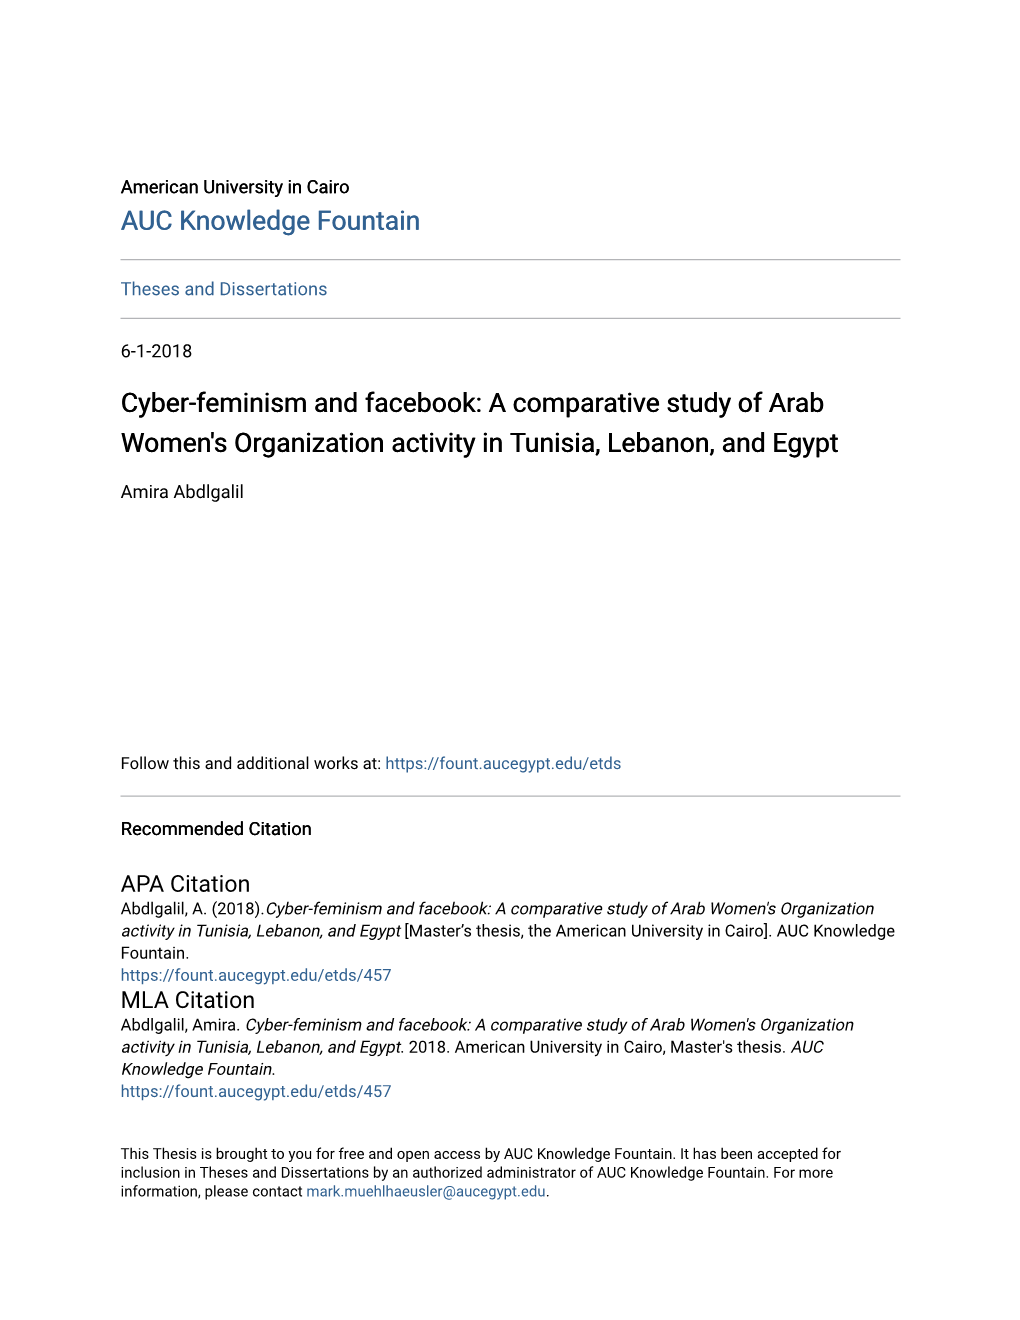 Cyber-Feminism and Facebook: a Comparative Study of Arab Women's Organization Activity in Tunisia, Lebanon, and Egypt